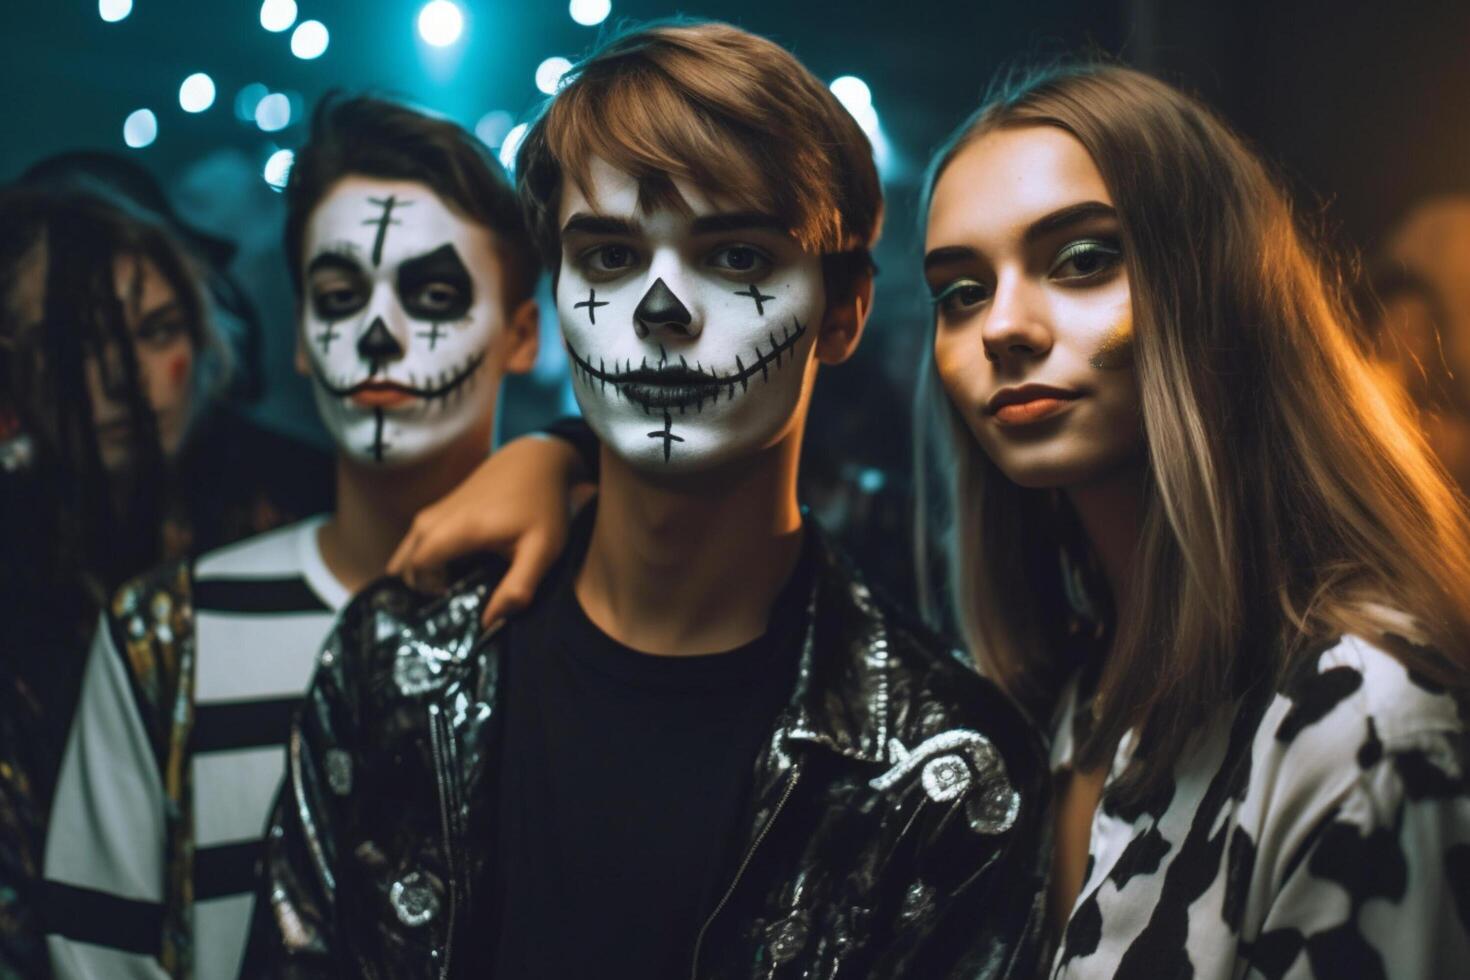 Teenagers friends in costumes celebrating and having fun at halloween ...